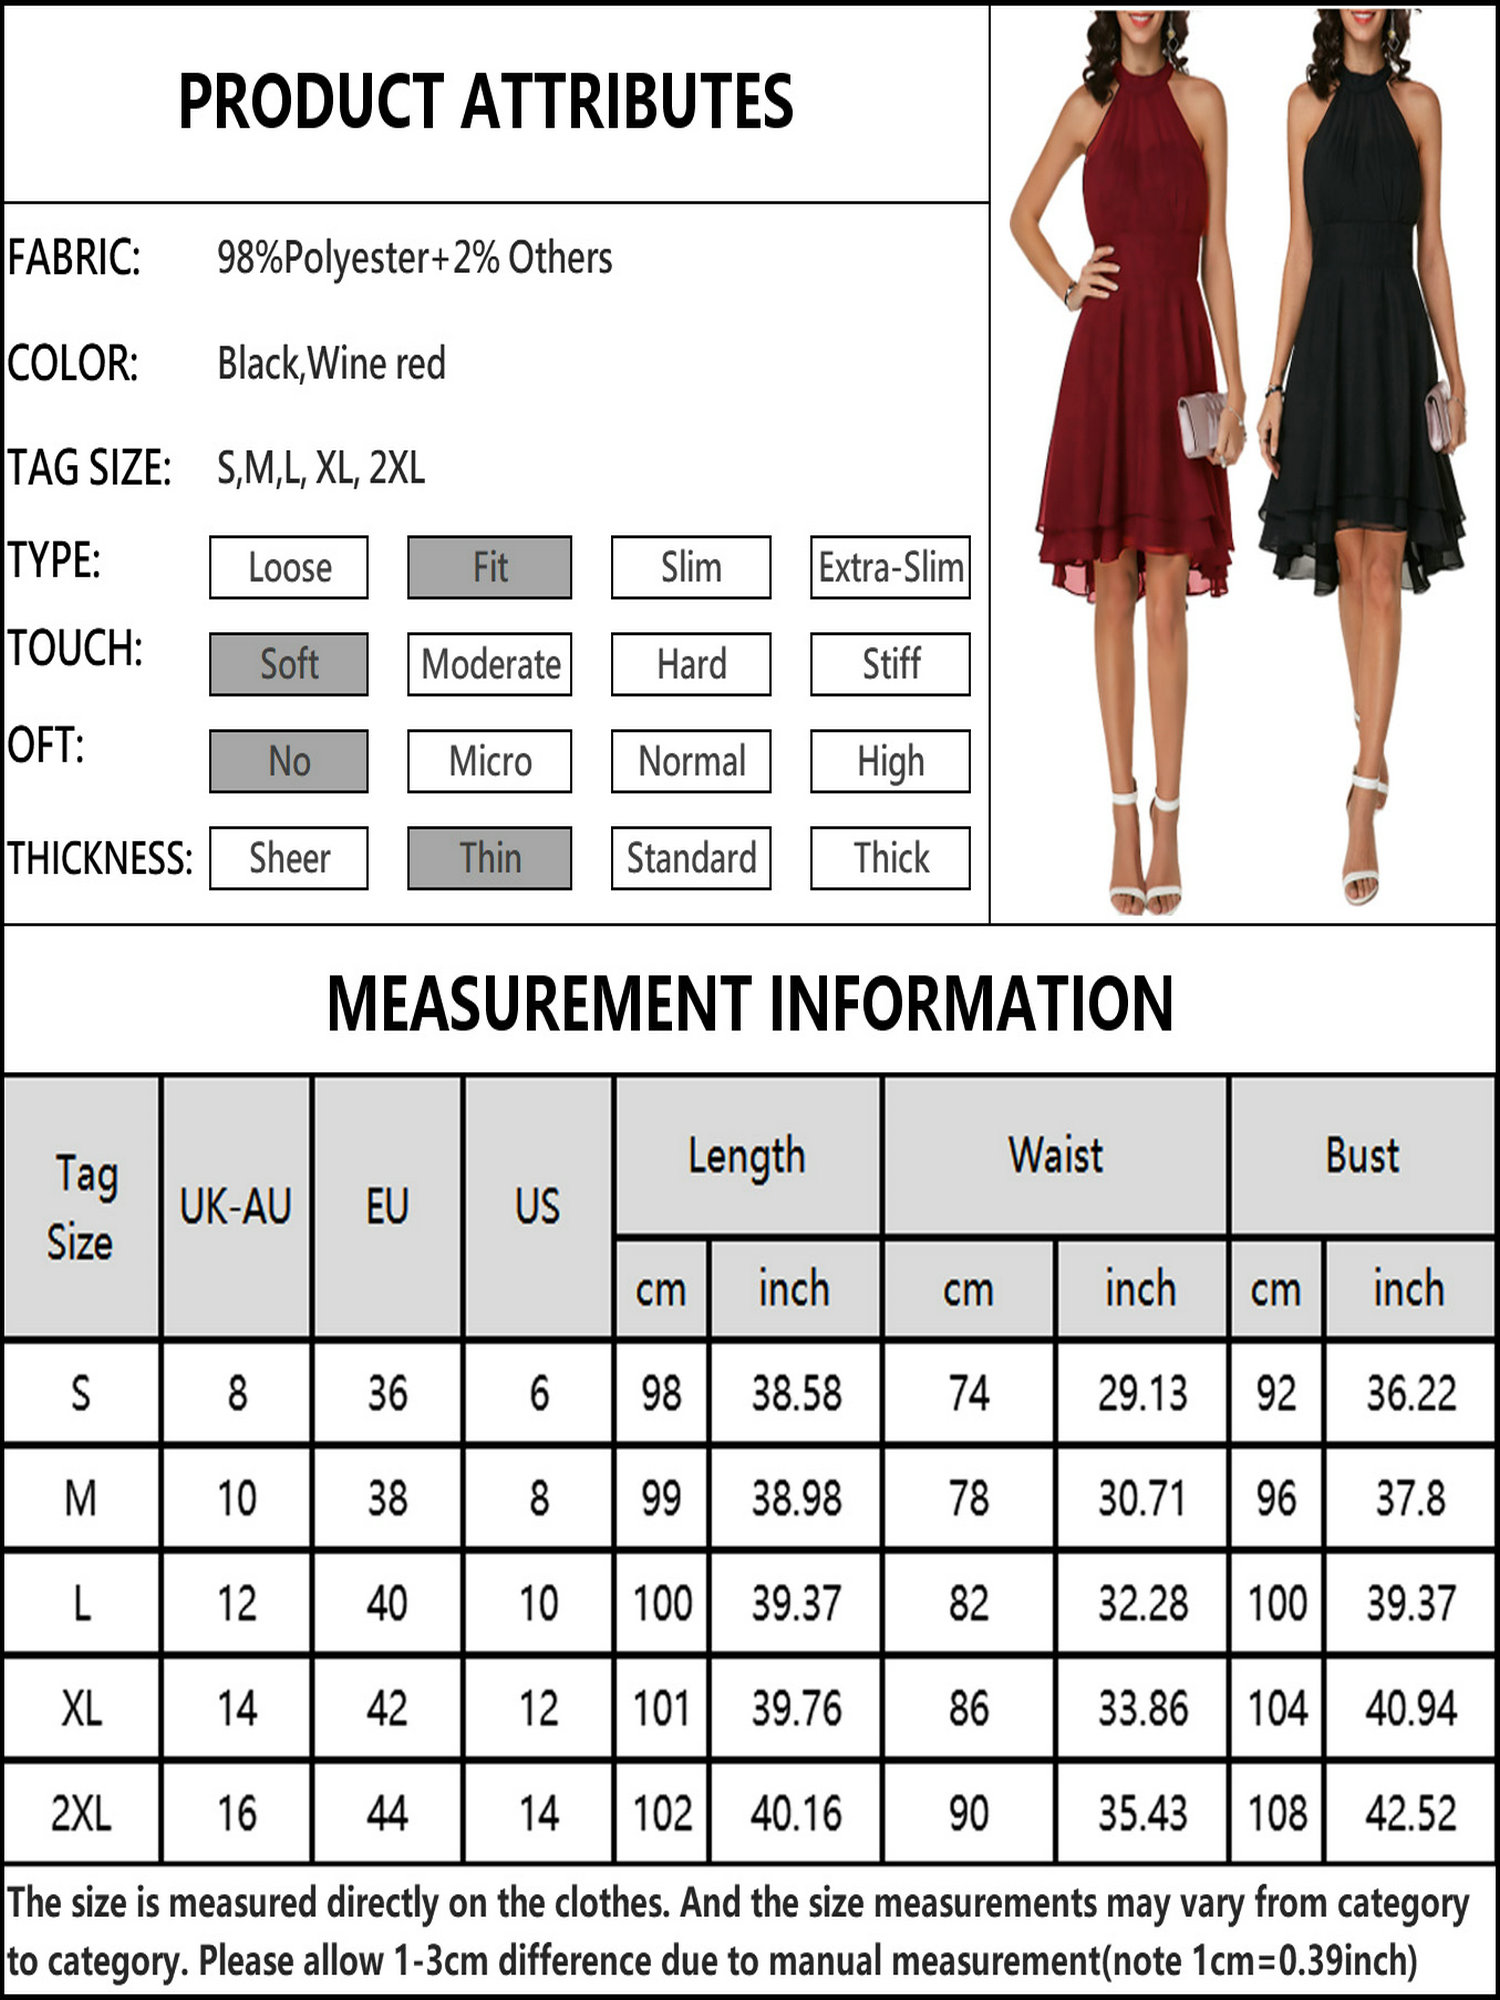 Smilkoo Women Chiffon Halter Party Bridesmaid Dress High Low Dresses - image 2 of 4